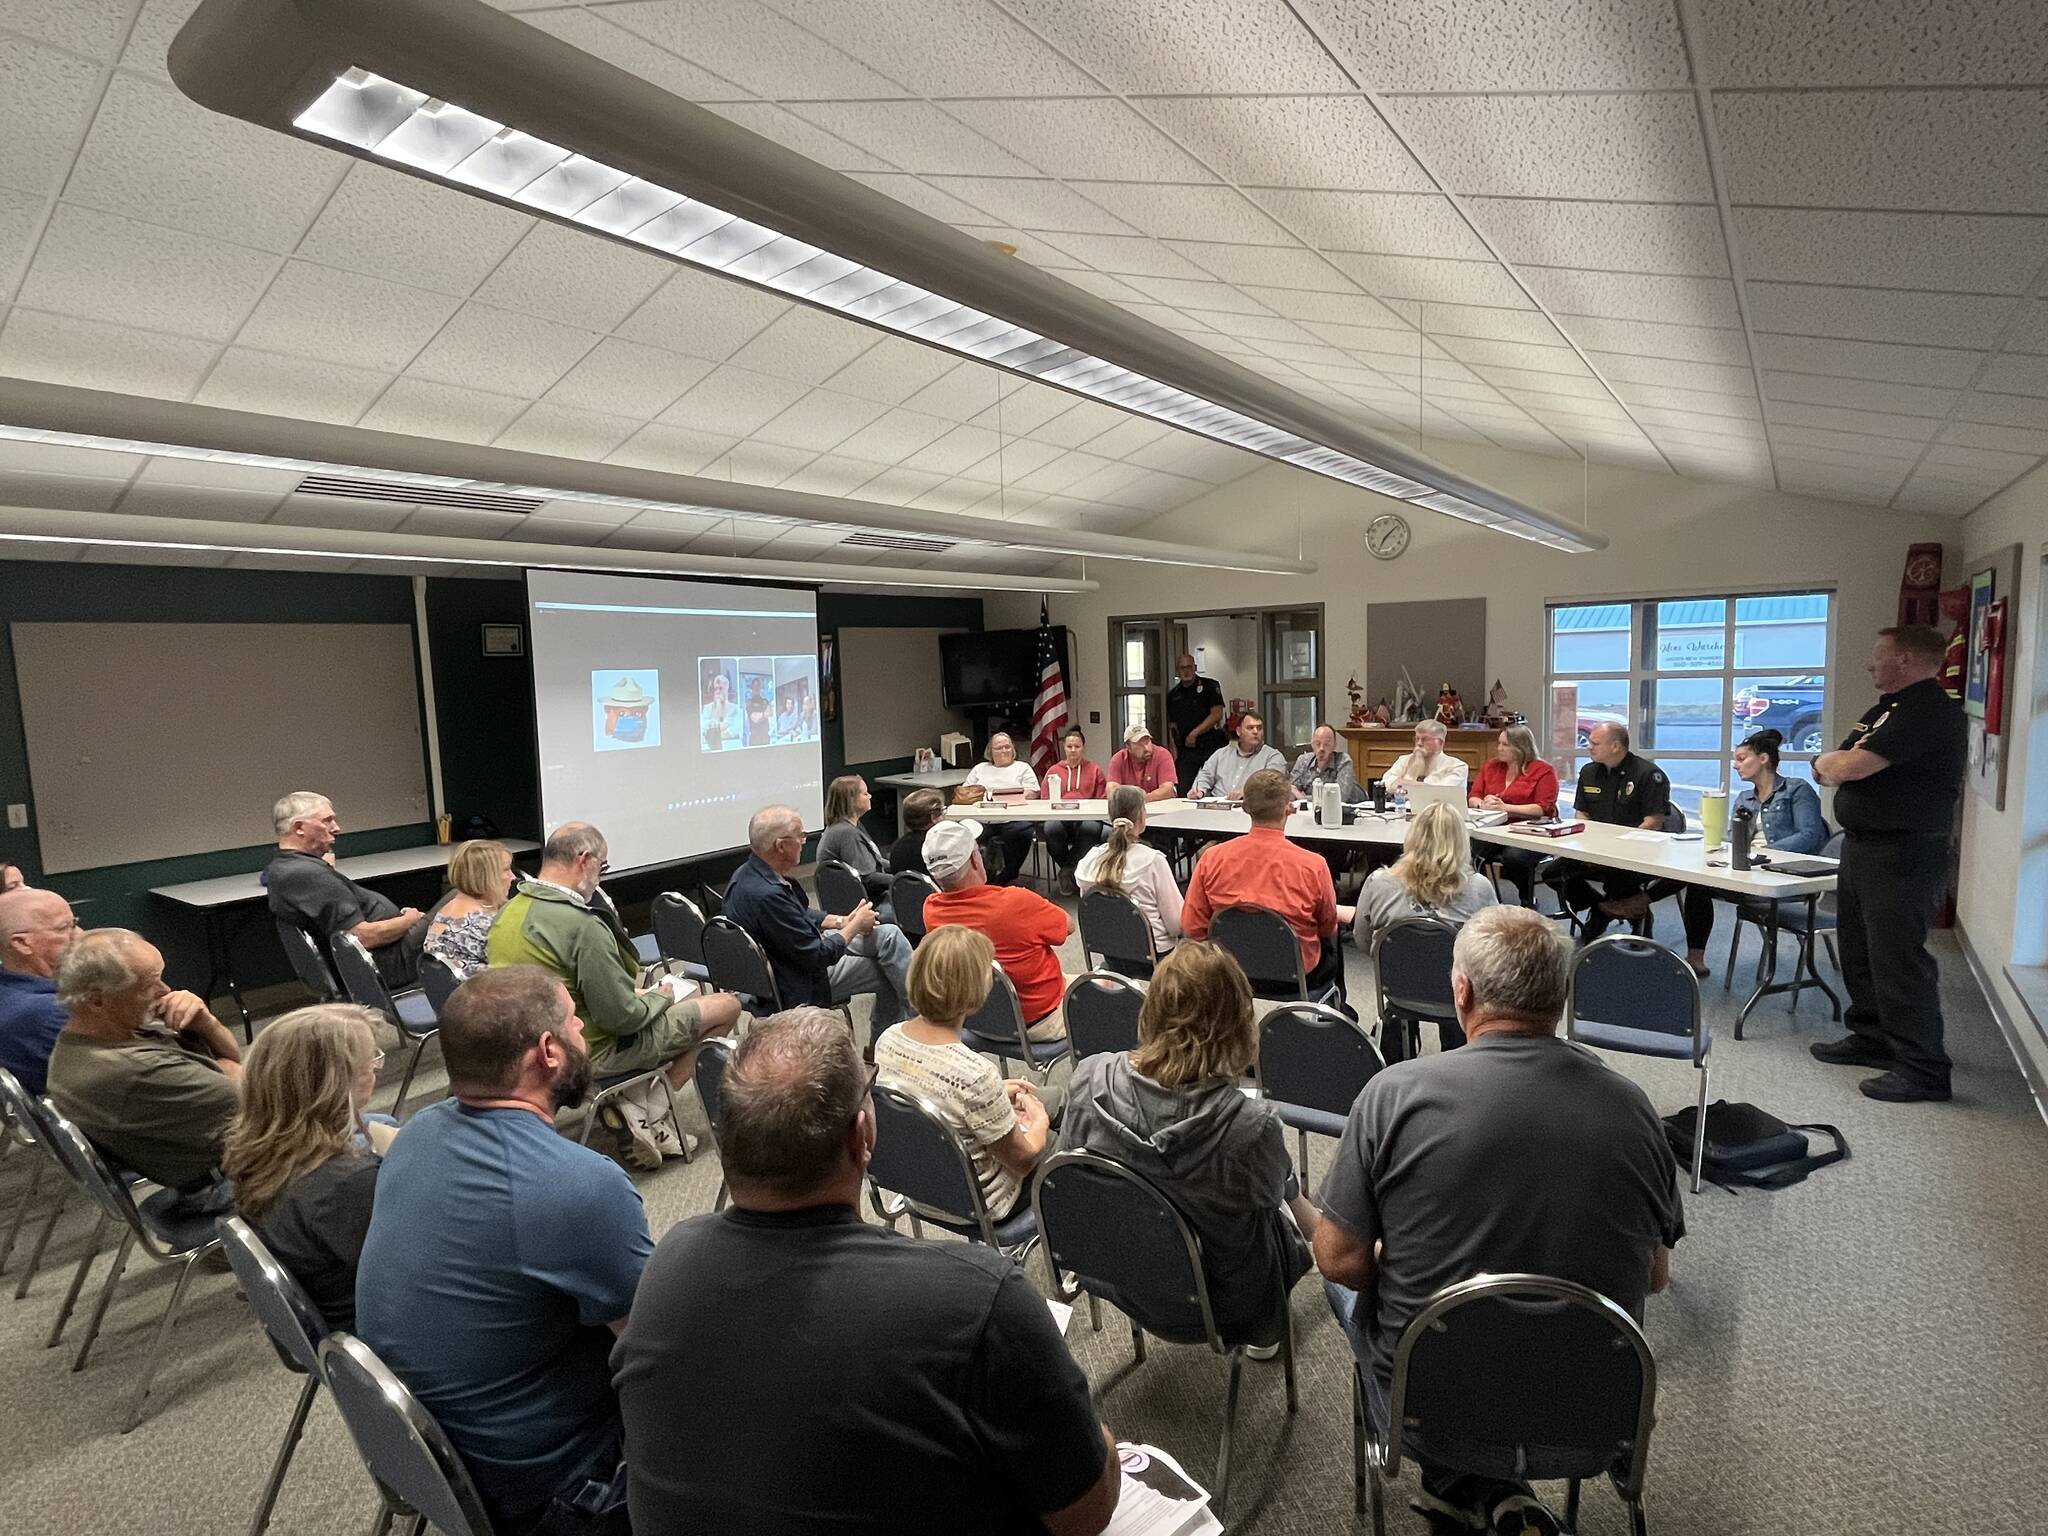 Matthew N. Wells | Daily World
There was a meeting on Wednesday, Sept. 7, 2022, where local city officials spoke about the importance of a Central Grays Harbor Regional Fire Authority for the cities of Aberdeen, Hoquiam, and Cosmopolis.